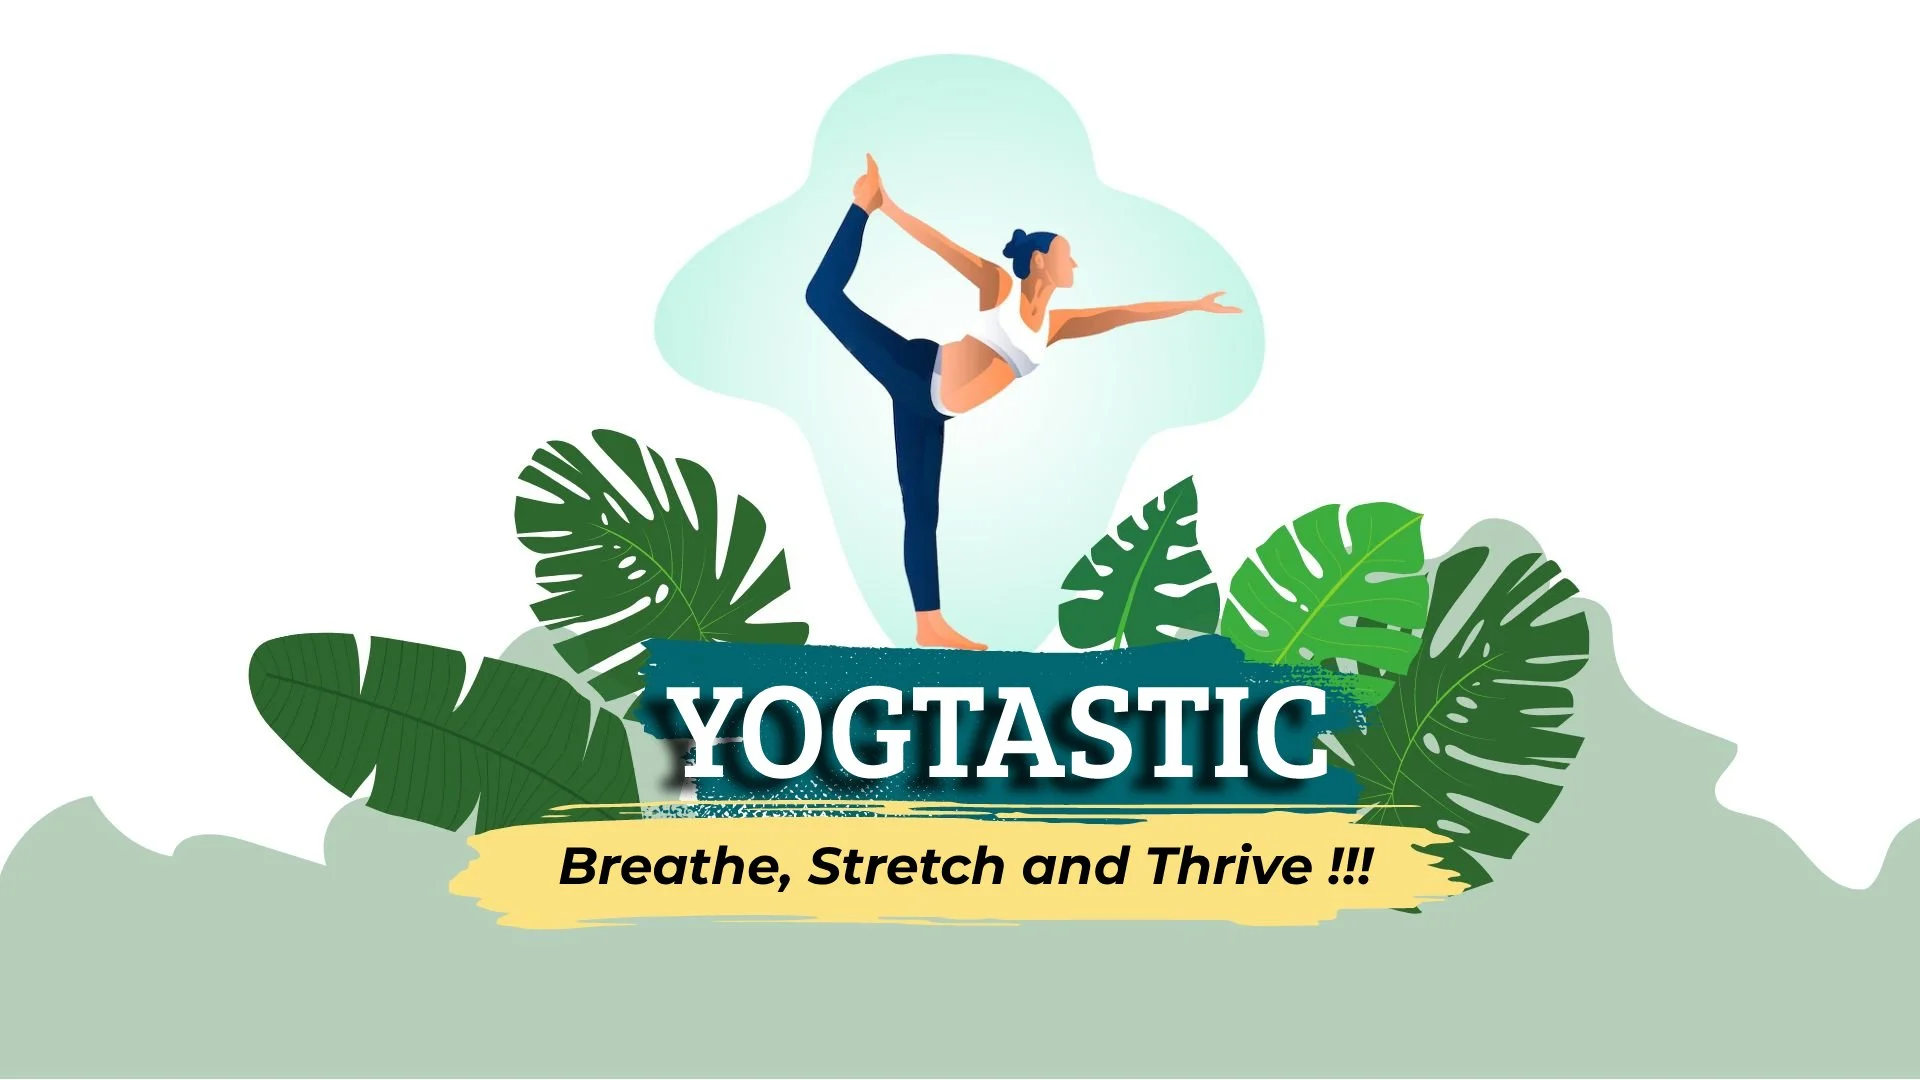 Yogtastic - All About Yoga